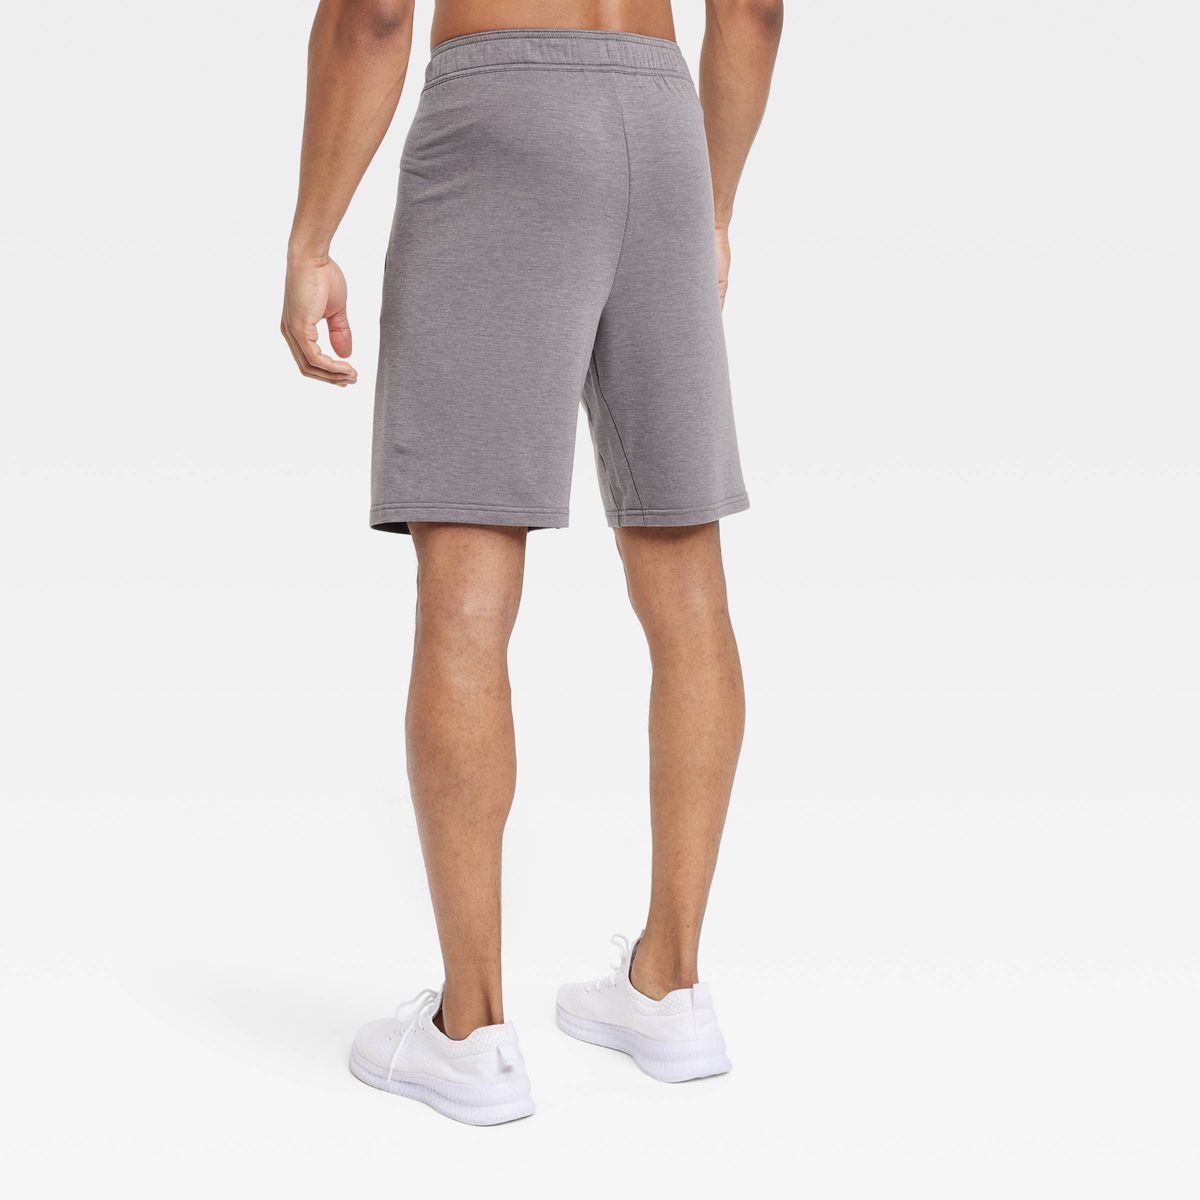 Men's Soft Gym Shorts 9" - All in Motion™ | Target